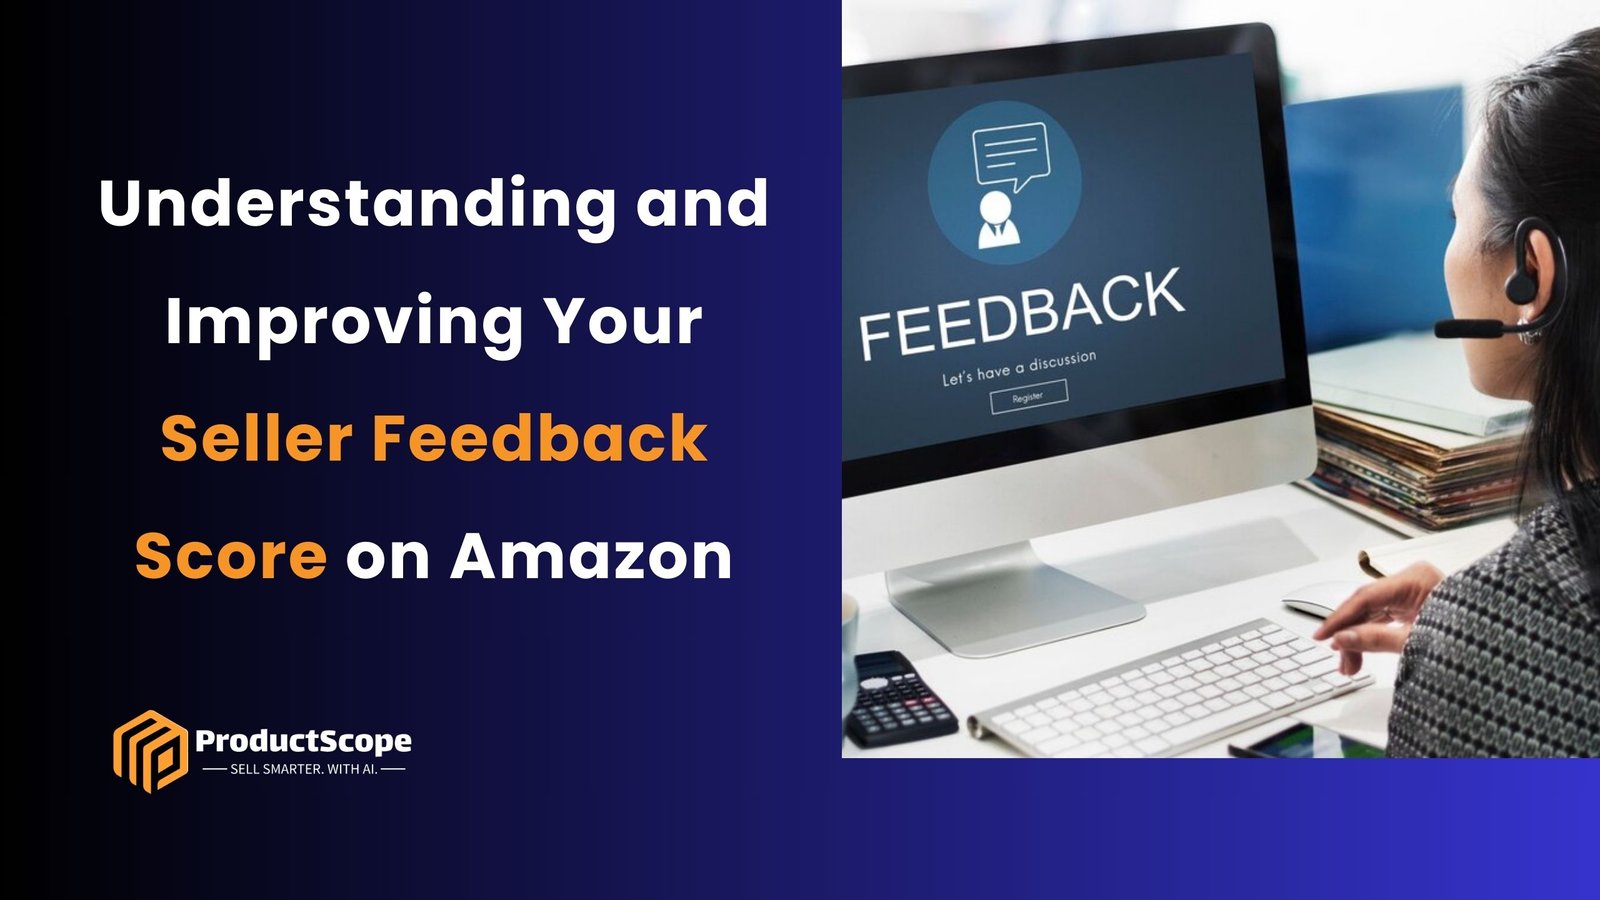 Understanding and Improving Your Seller Feedback Score on Amazon